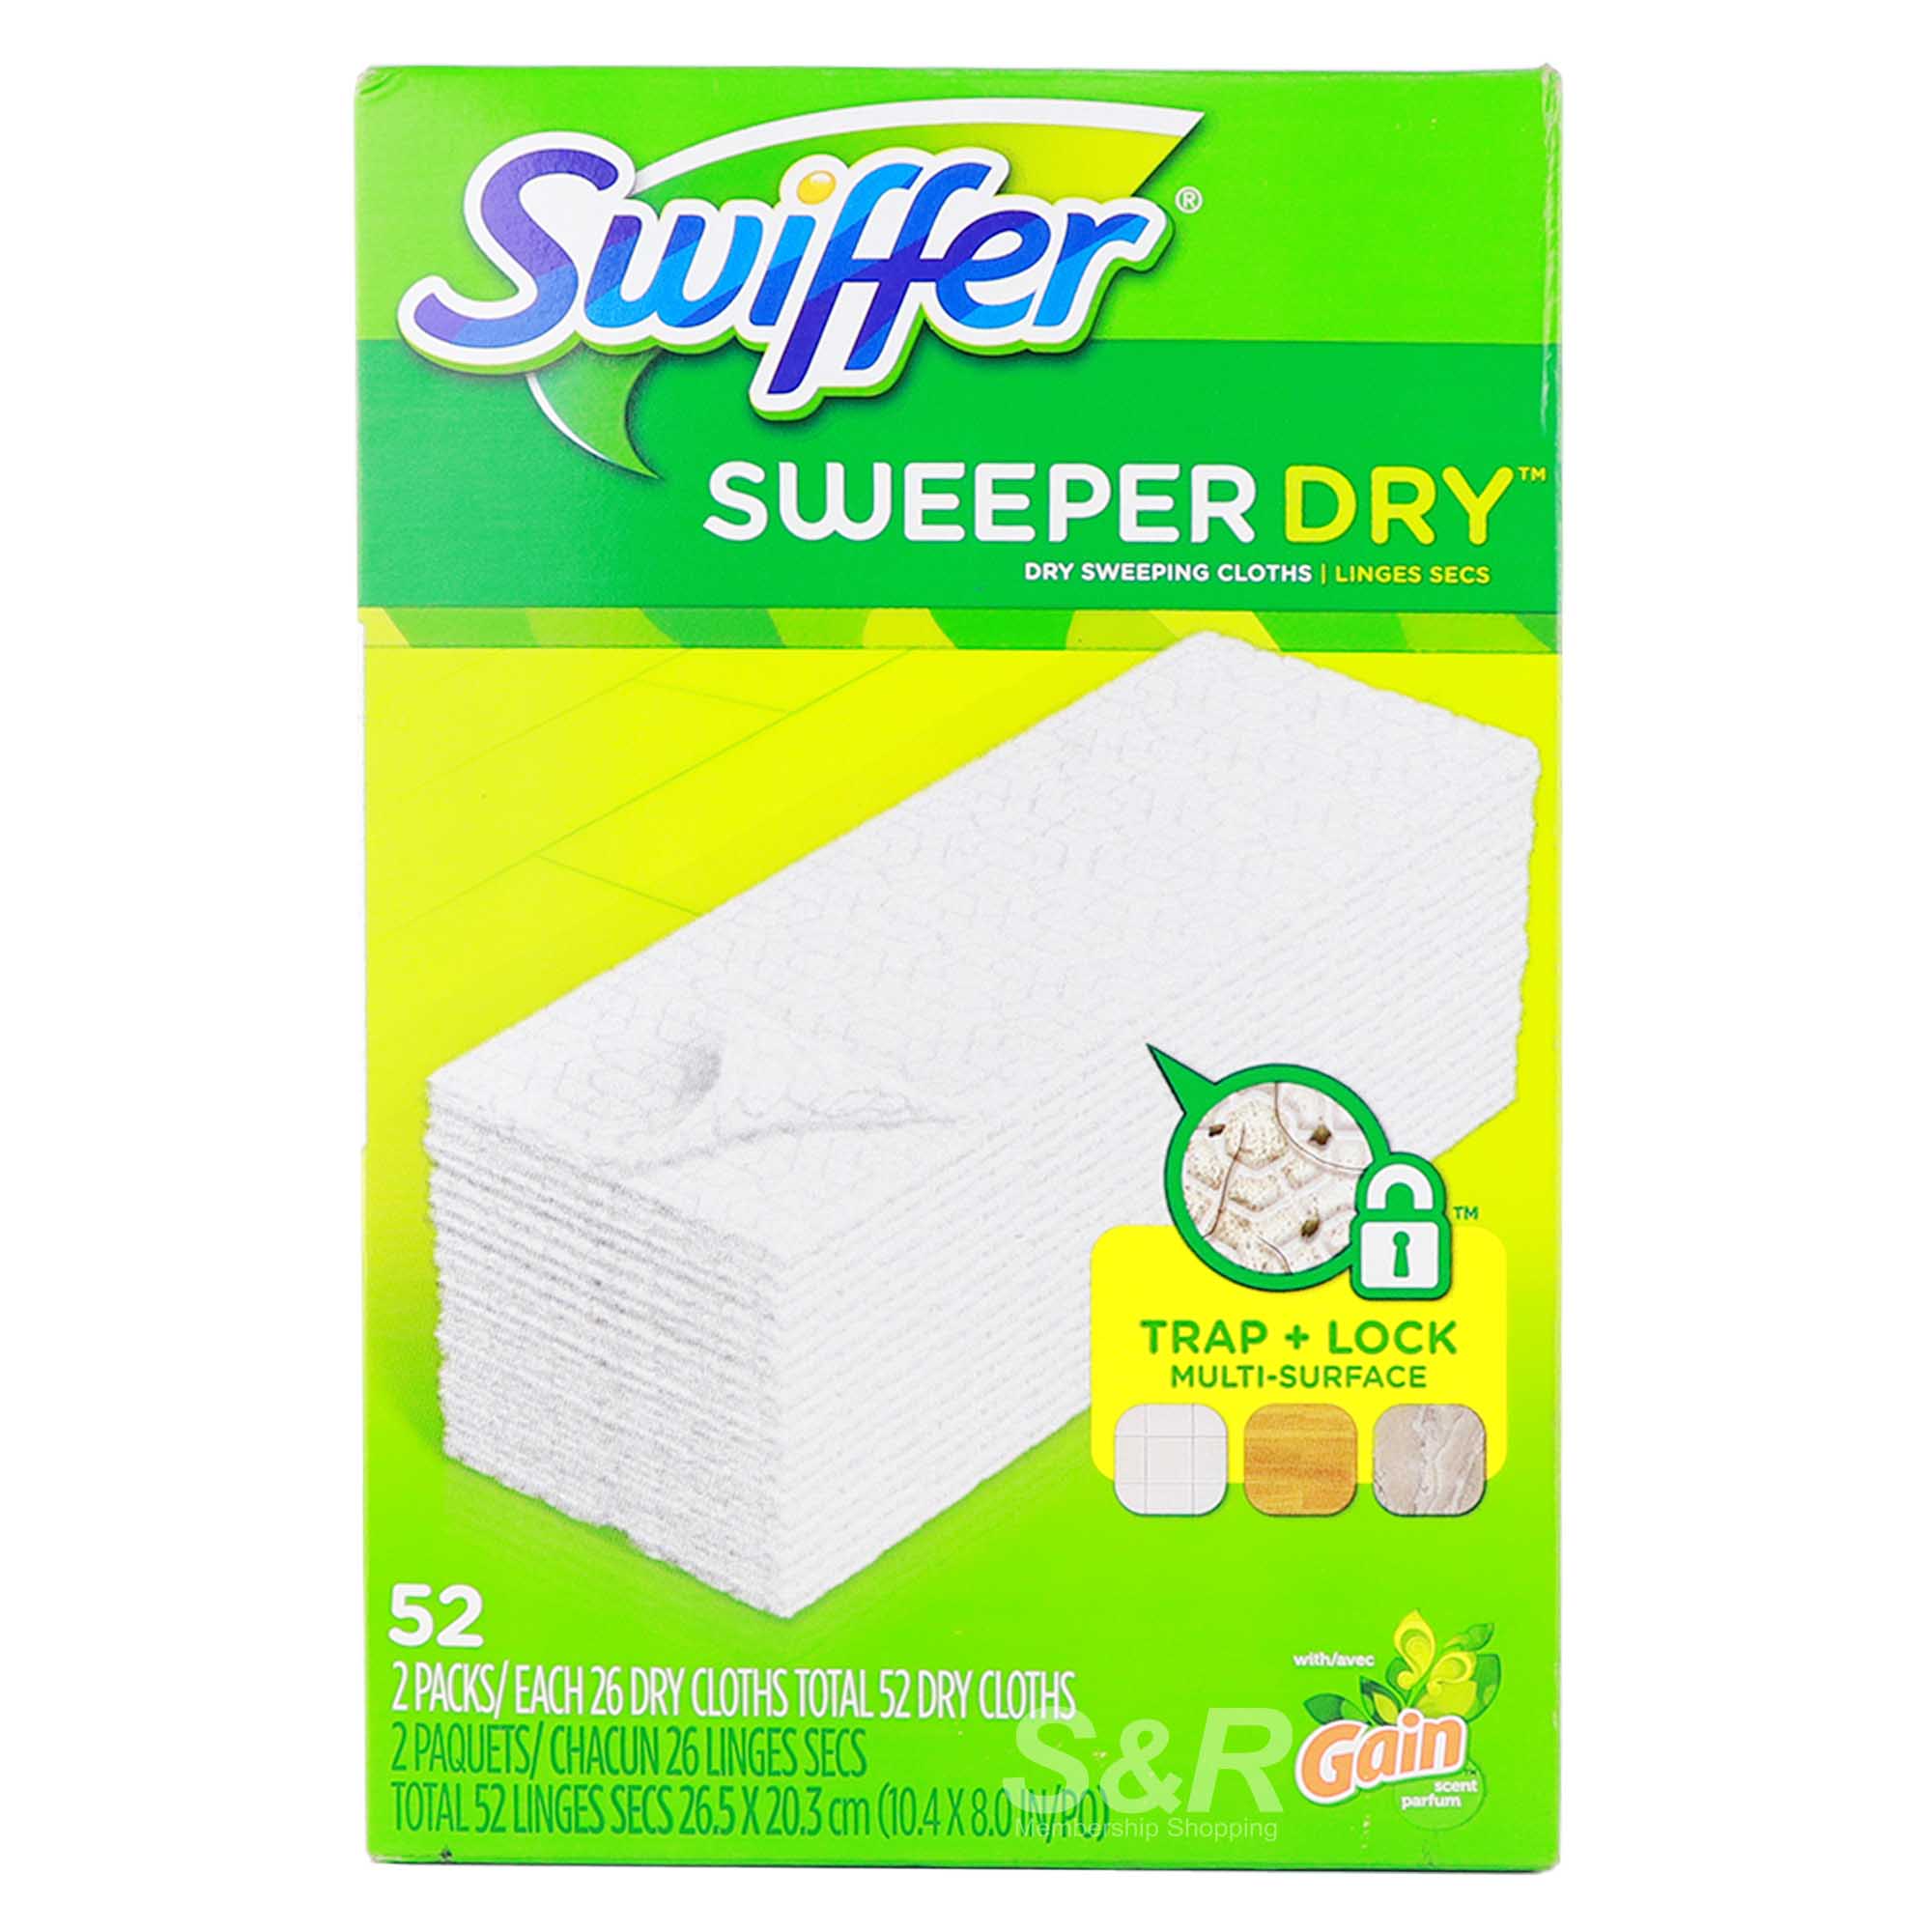 Swiffer Dry Sweeping Cloths Unscented 52pcs